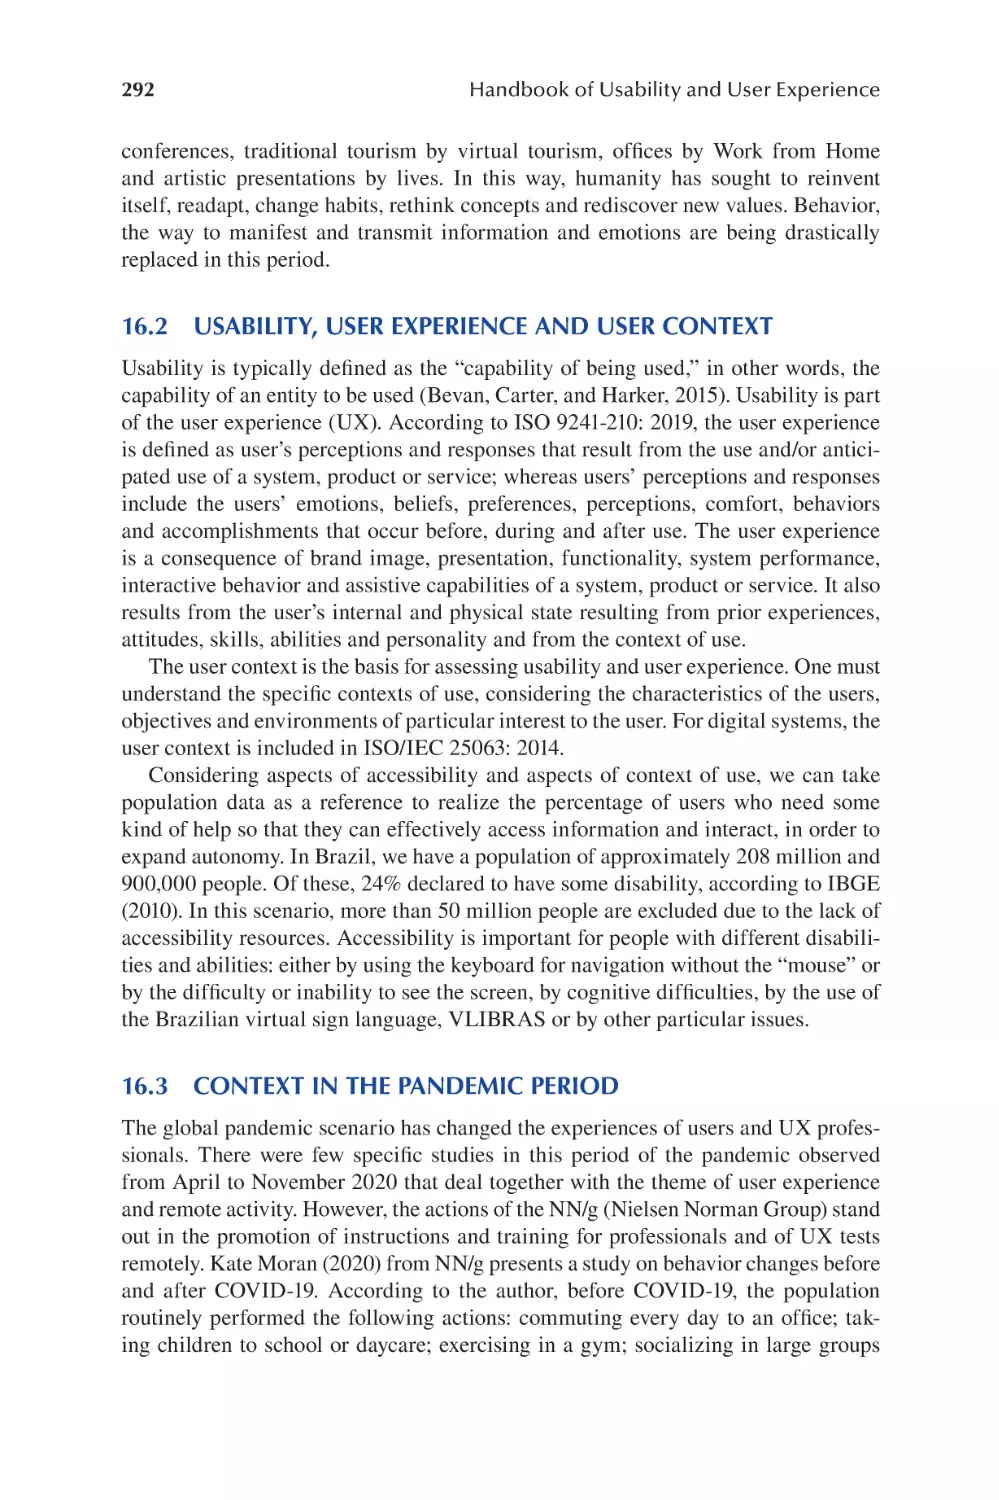 16.2 Usability, User Experience and User Context
16.3 Context in the Pandemic Period